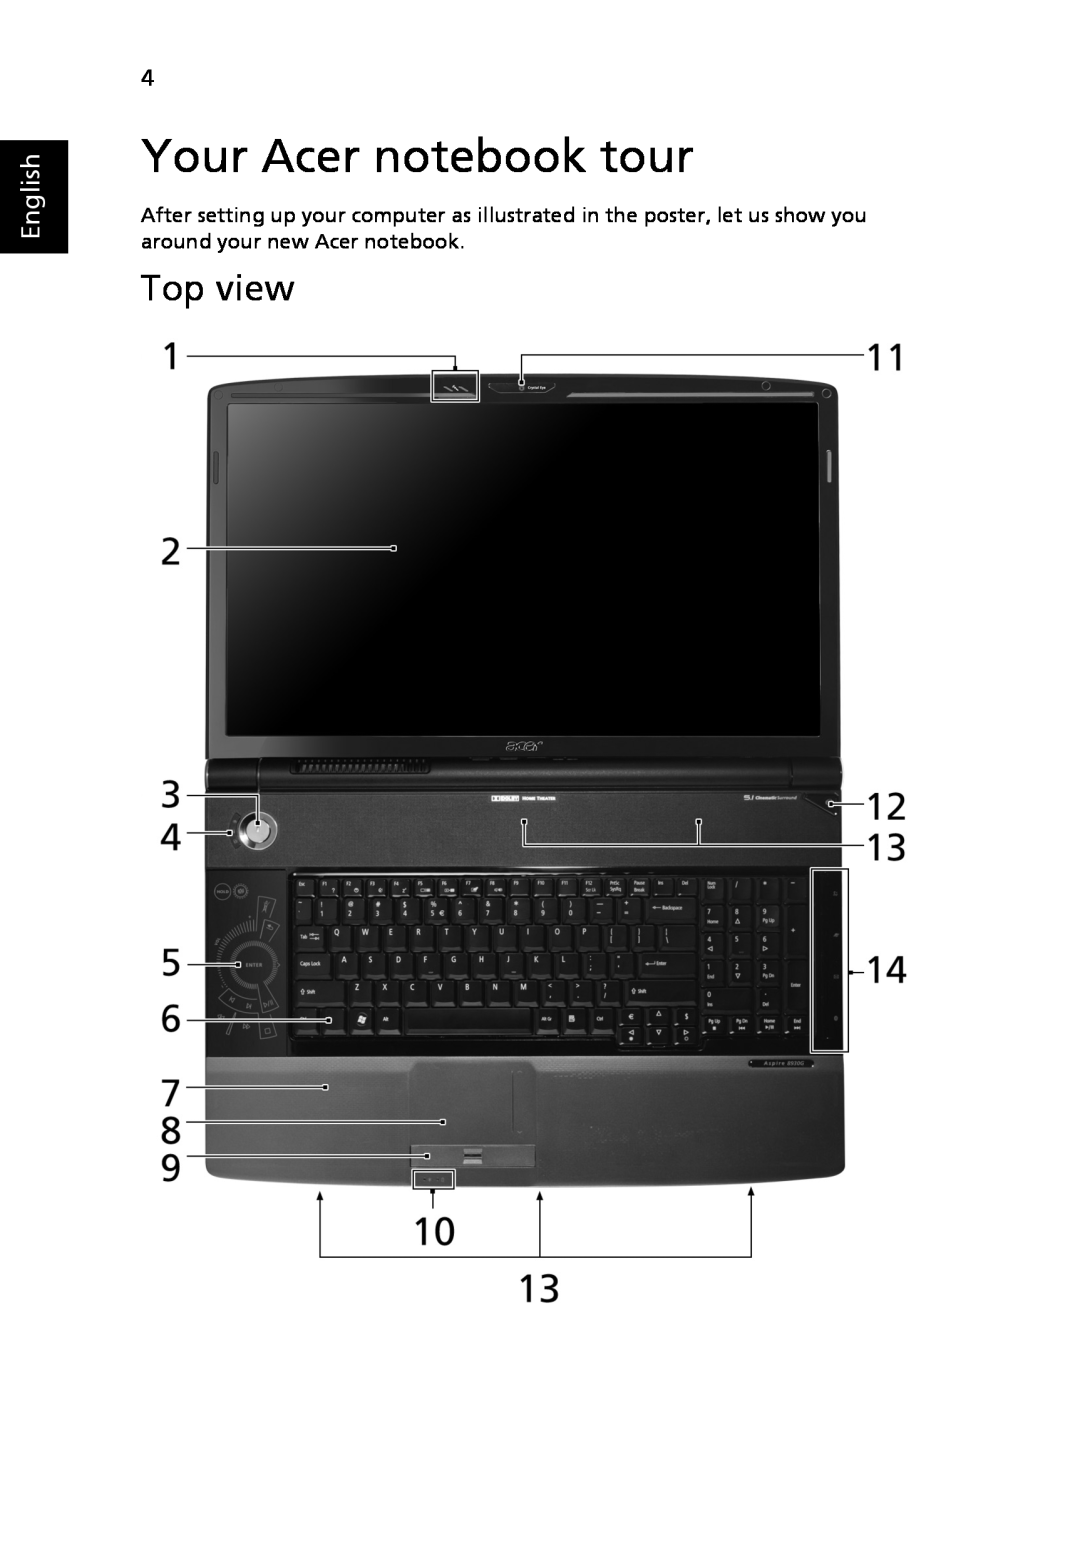 Acer 8930Q, 8930 Series, 8930G manual Your Acer notebook tour, Top view, English 